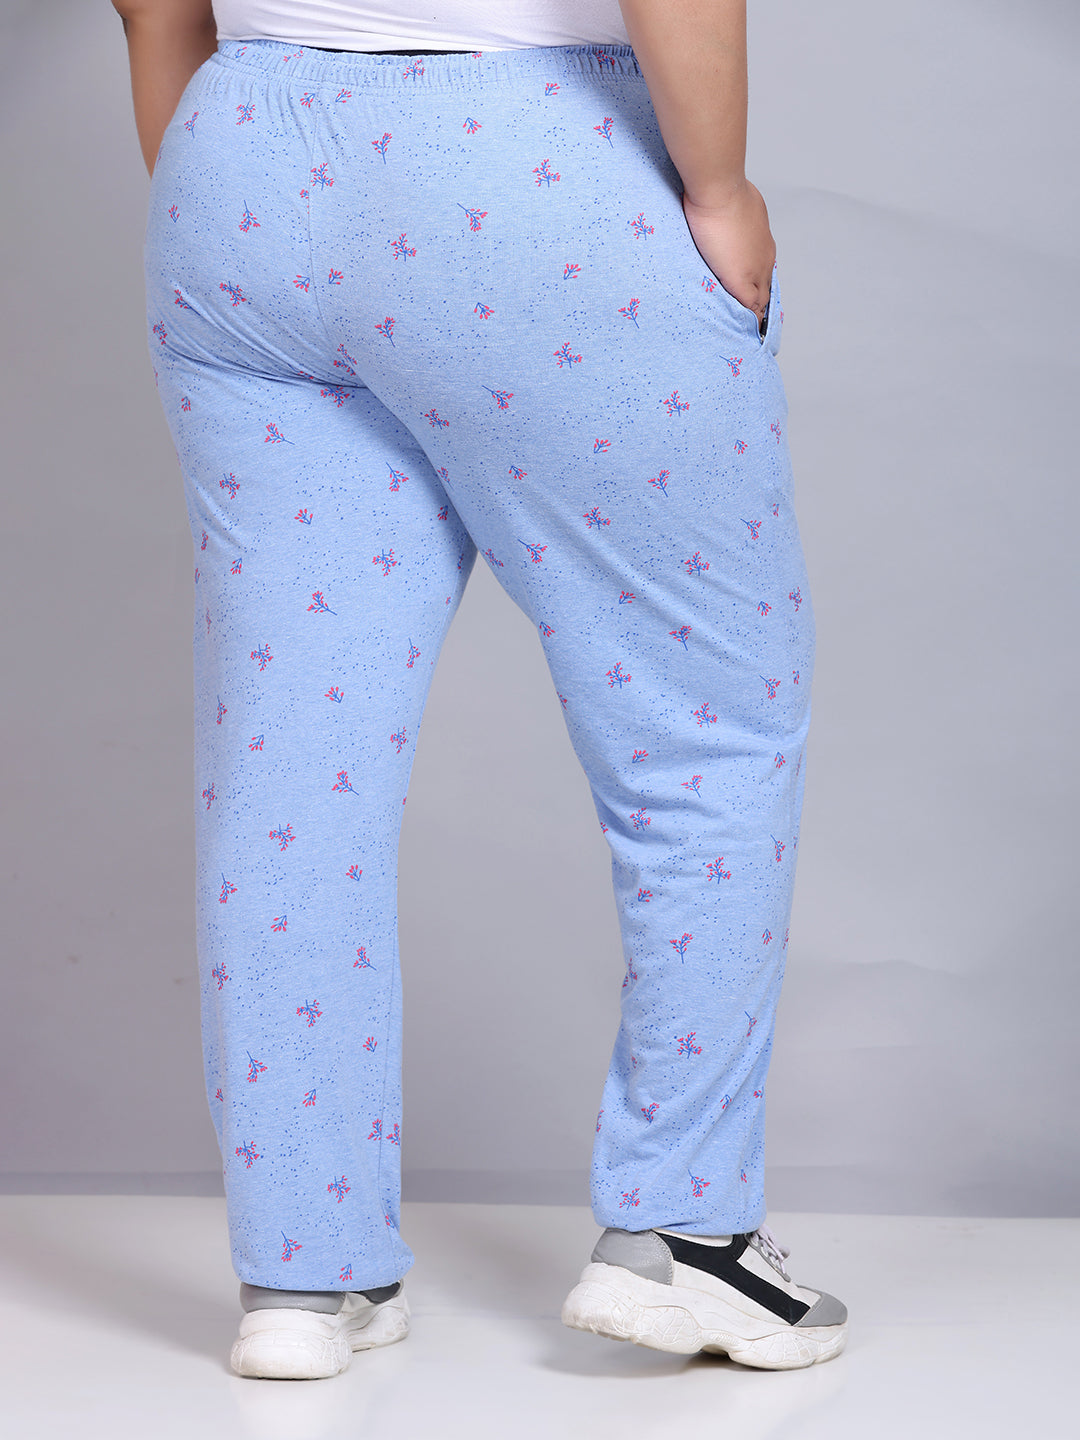 CUPID Plus Size Regular Fit Printed Cotton Comfortable Night Pants, Lowers  for Women- 3XL/4XL/5XL